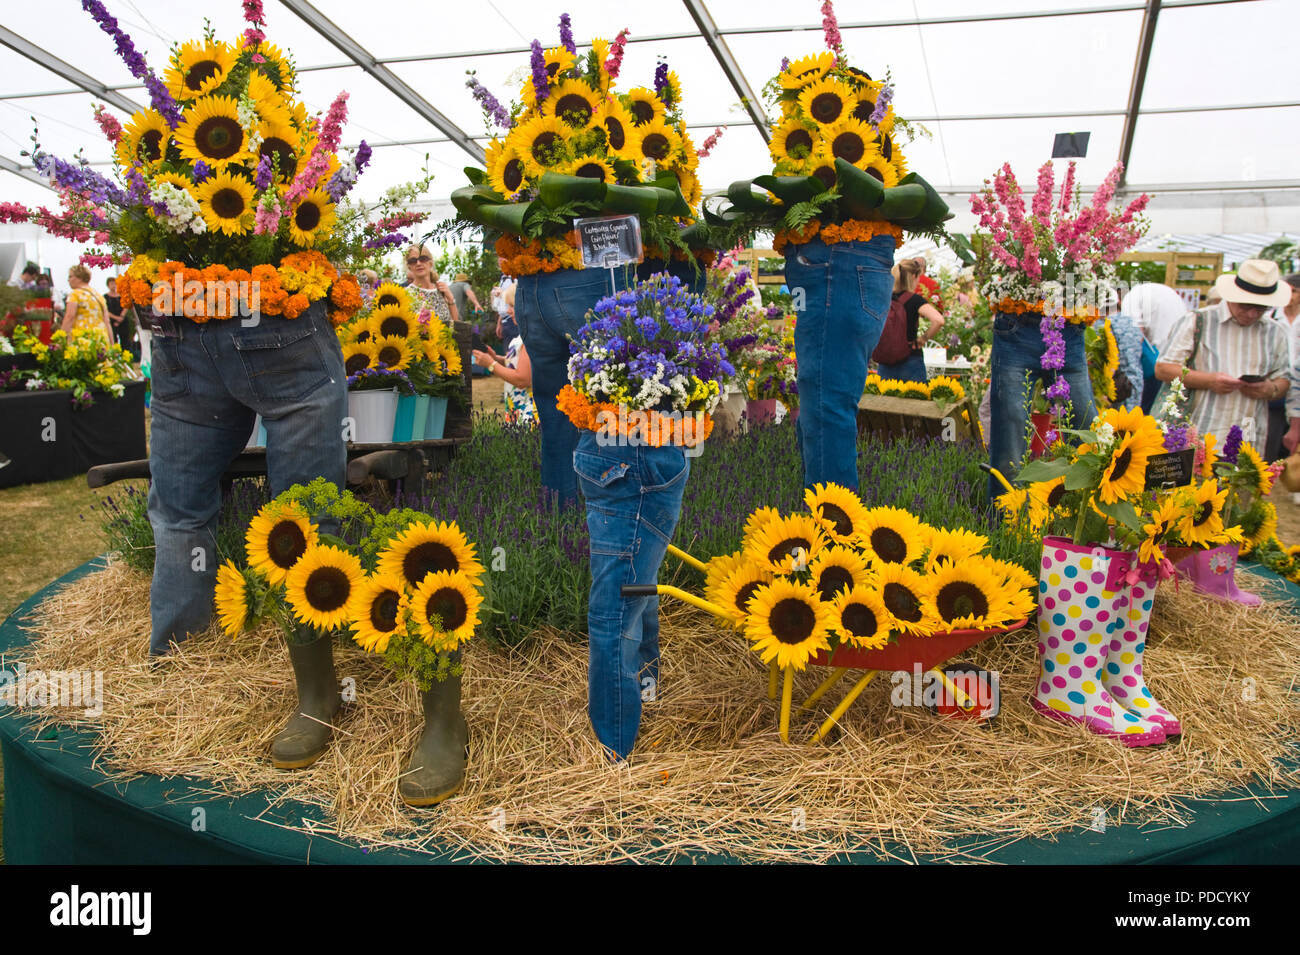 Display of sunflowers in unusual growing containers at RHS Tatton Park flower show Cheshire England UK Stock Photo